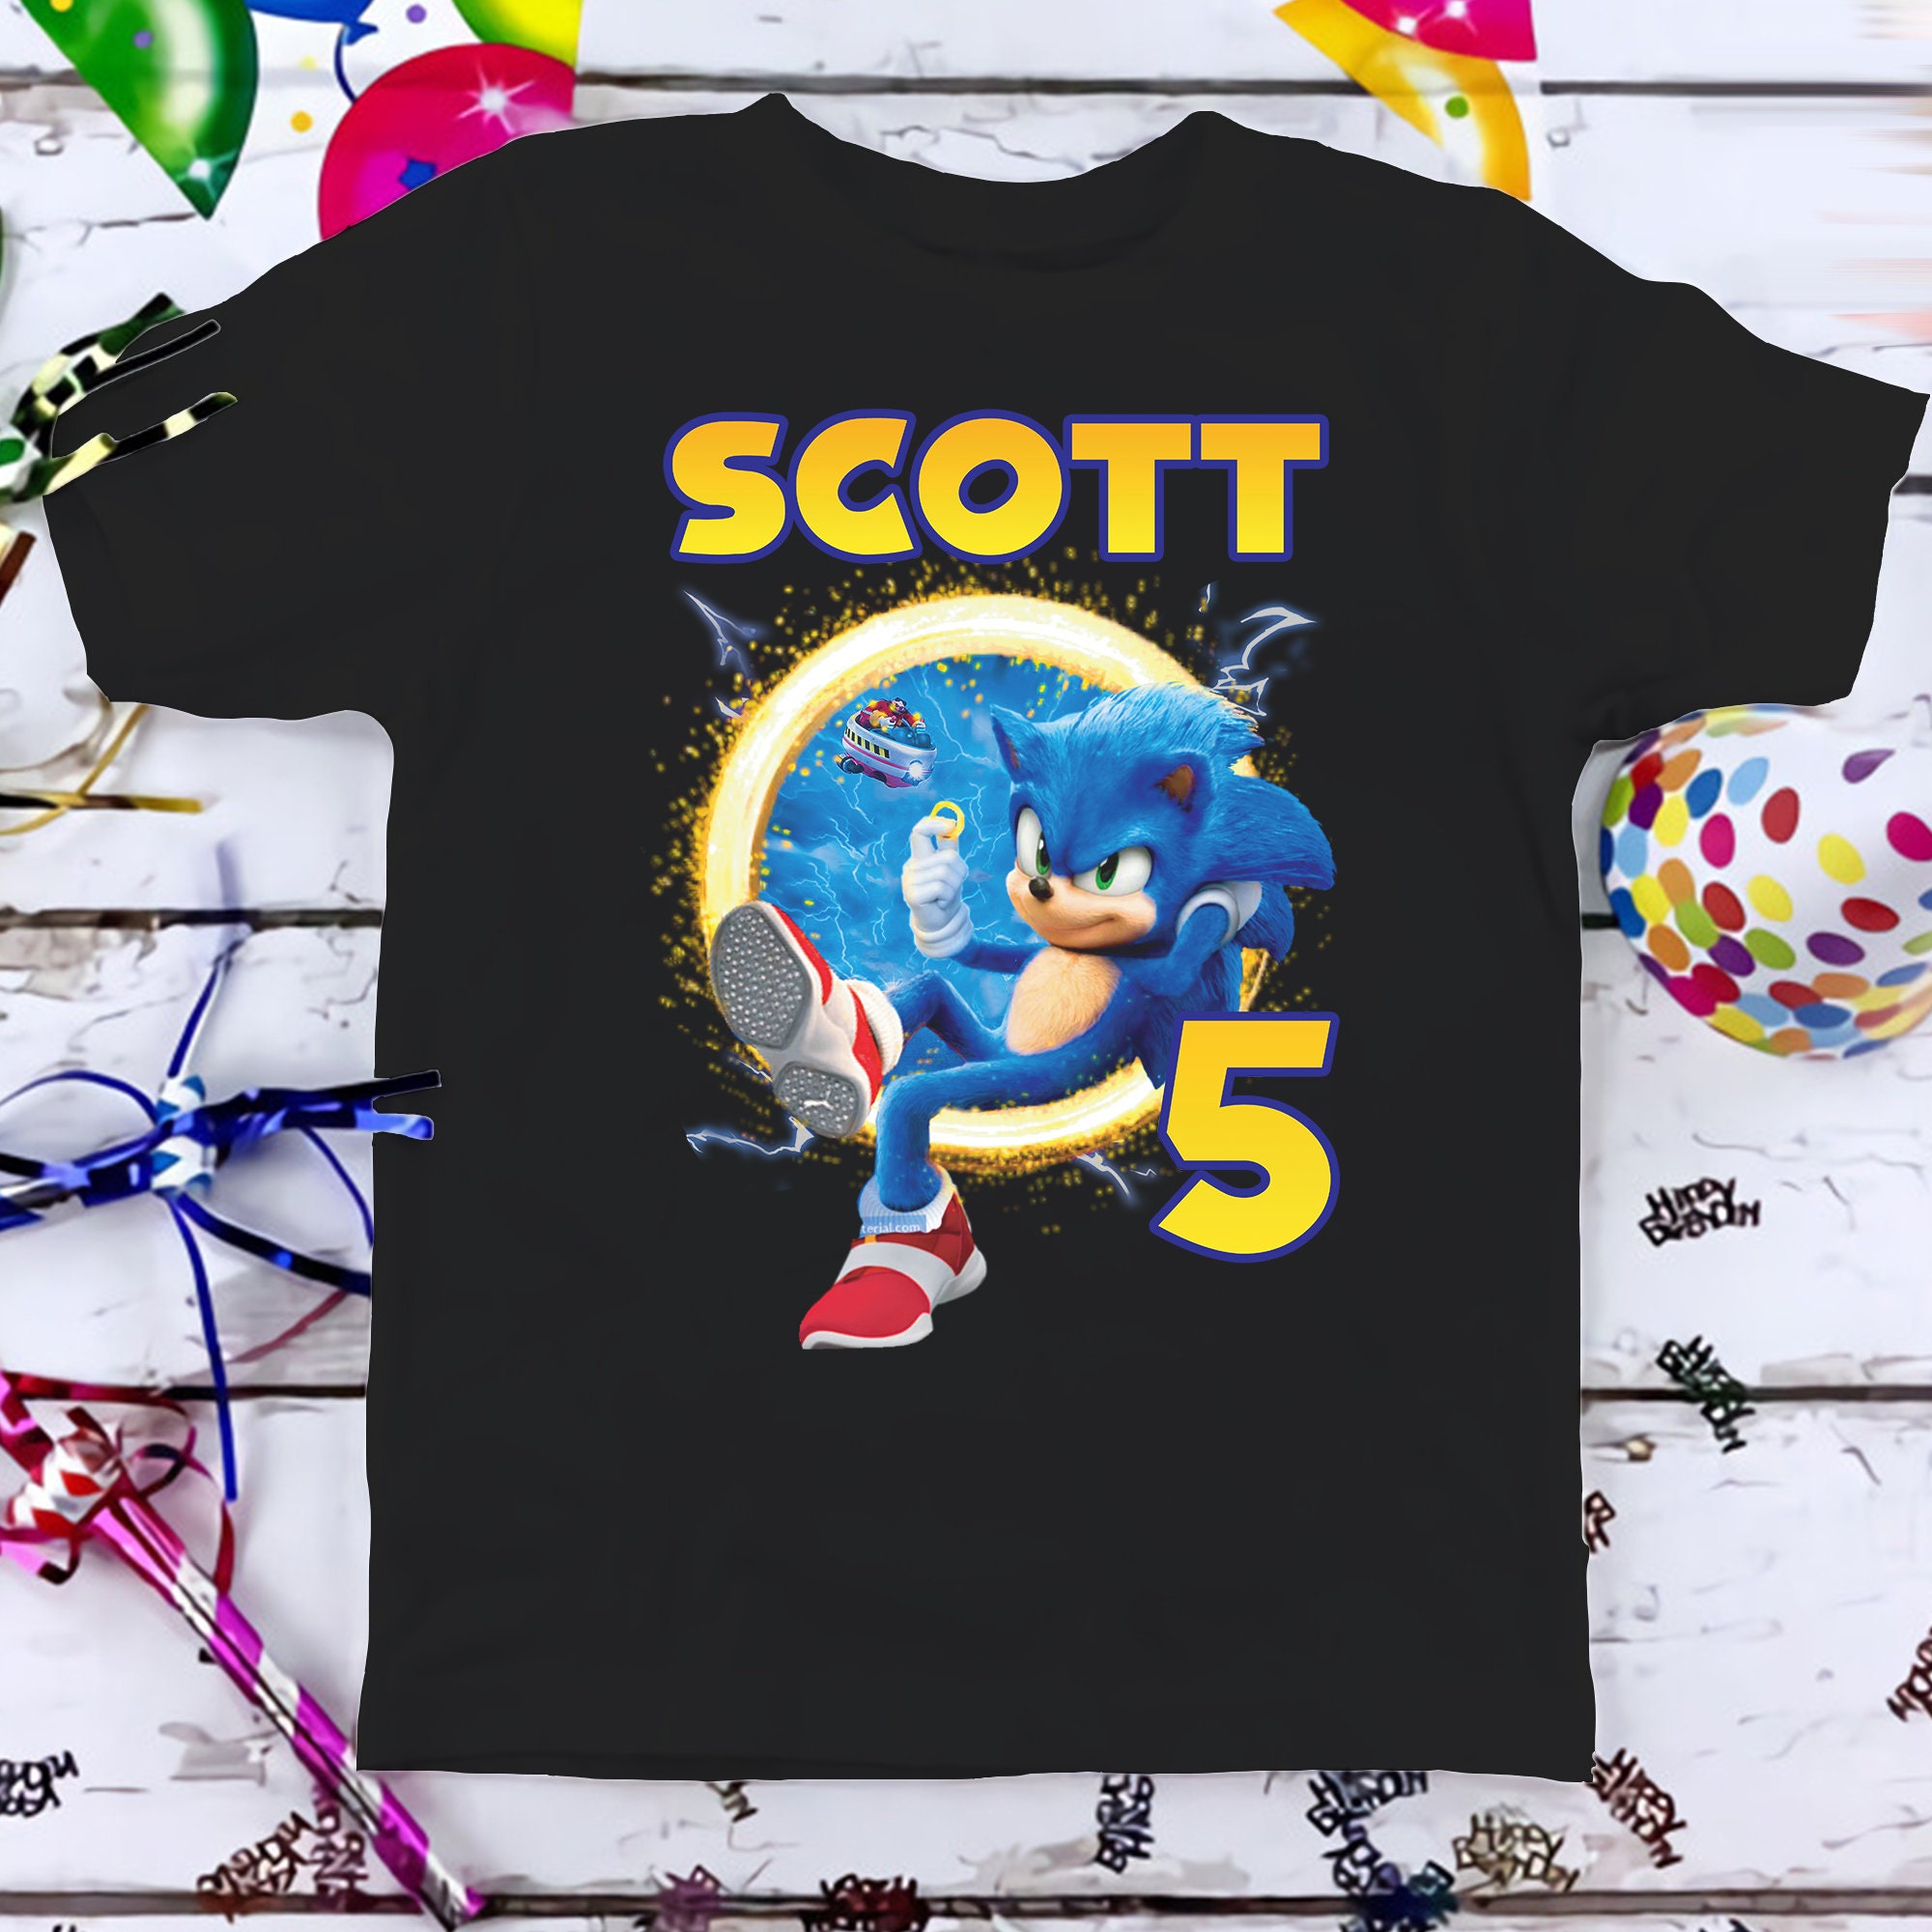 Sonic Characters T Shirt Iron on Transfer Decal #38